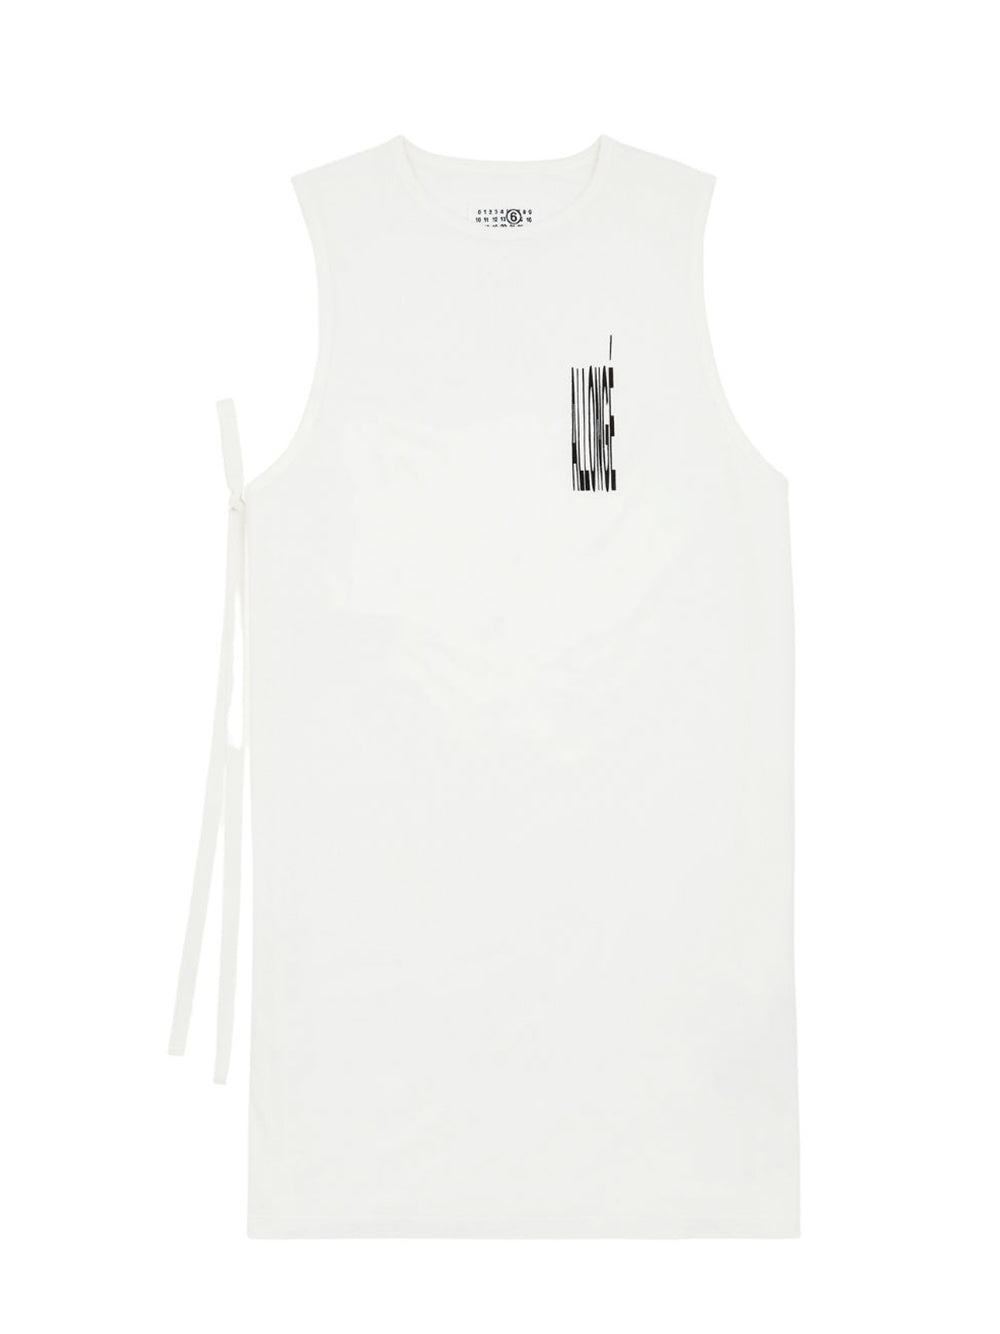 Cotton Jersey Top (Off White)